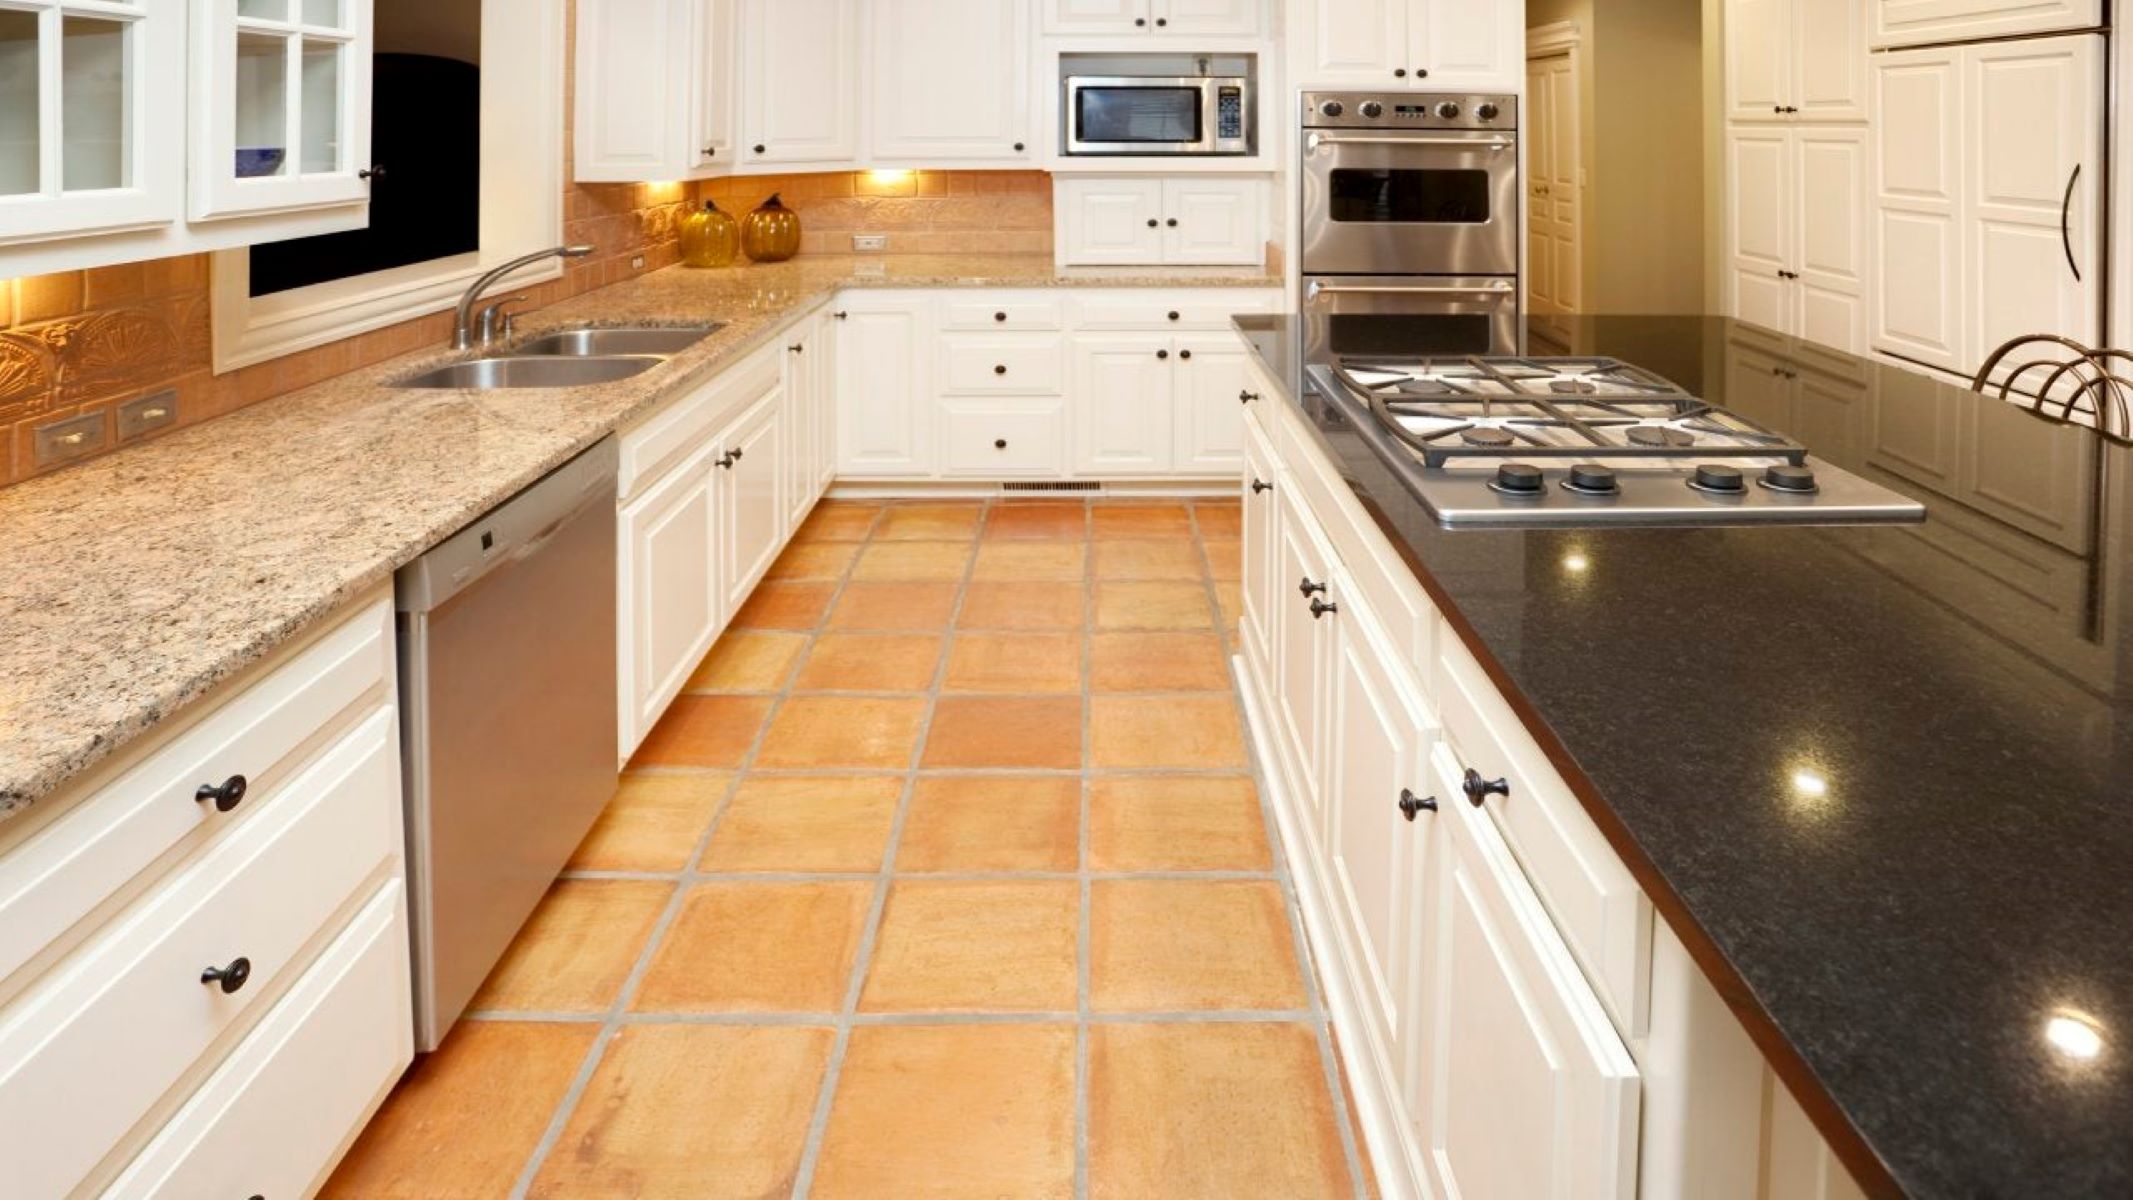 How Much Is It To Replace Granite Countertops